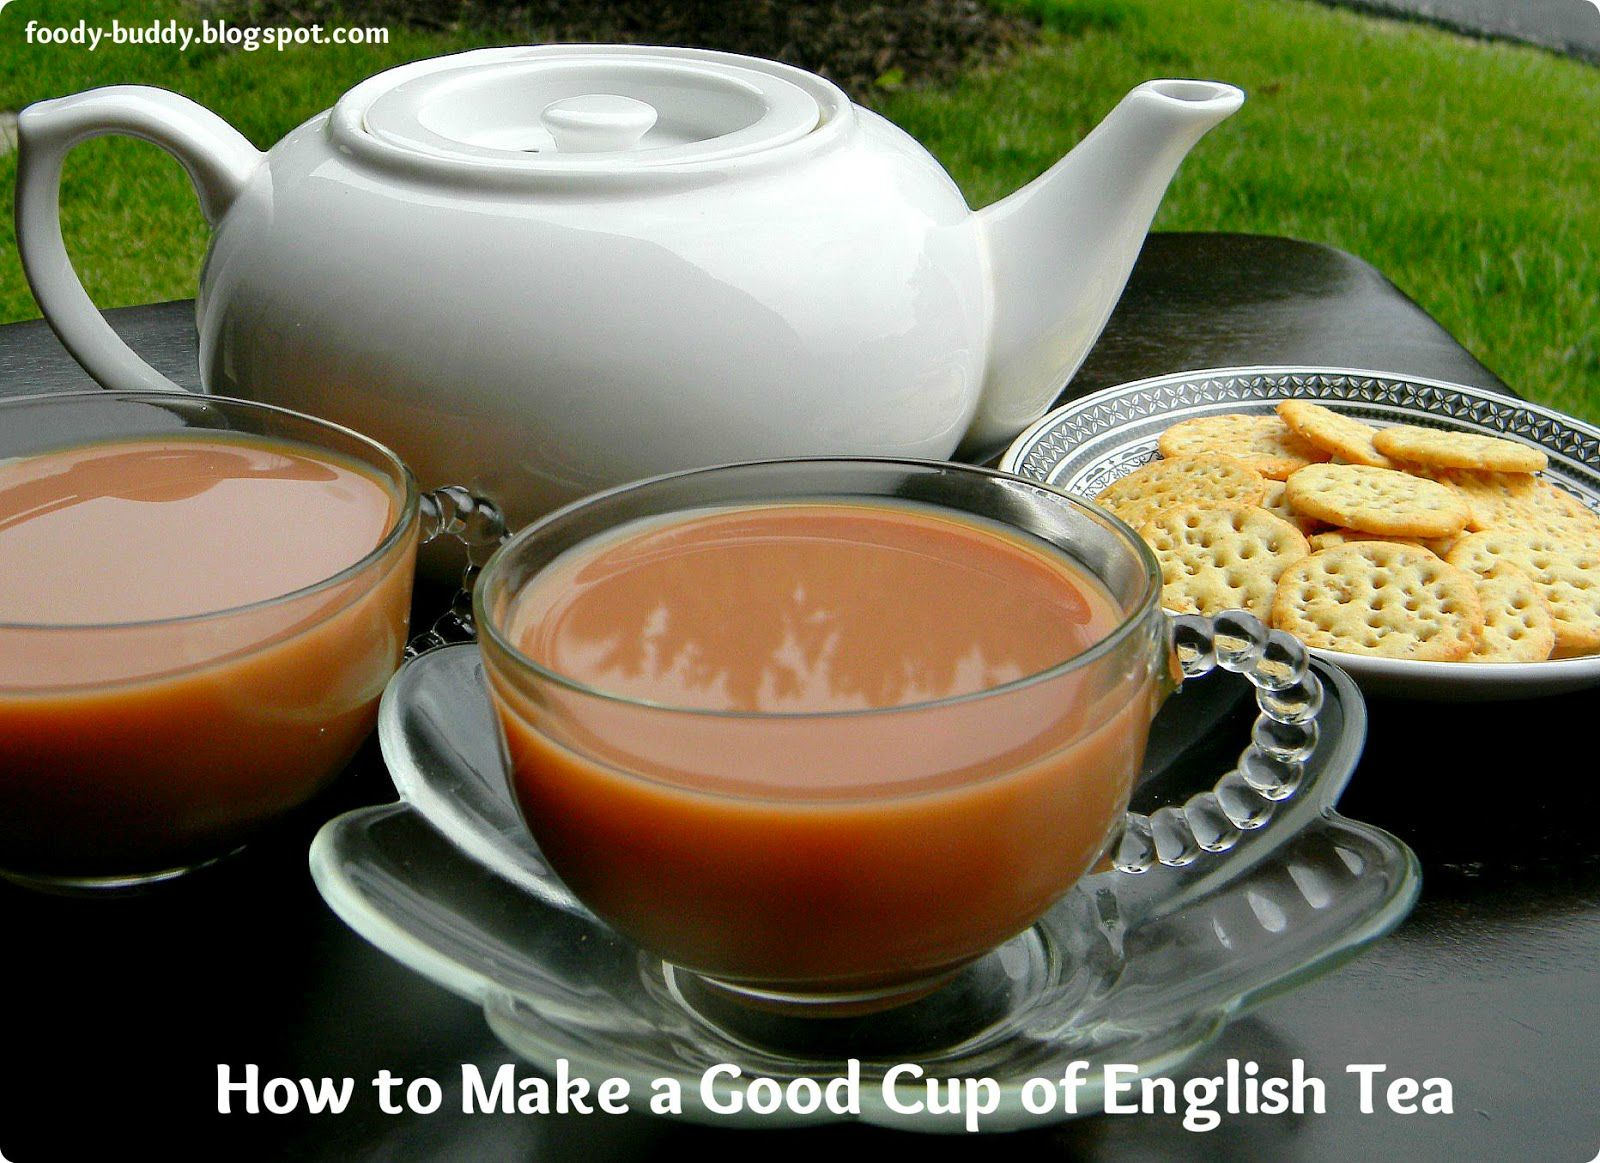 Foody - Buddy: An English Cup of Tea / How to make a Good Tea with video